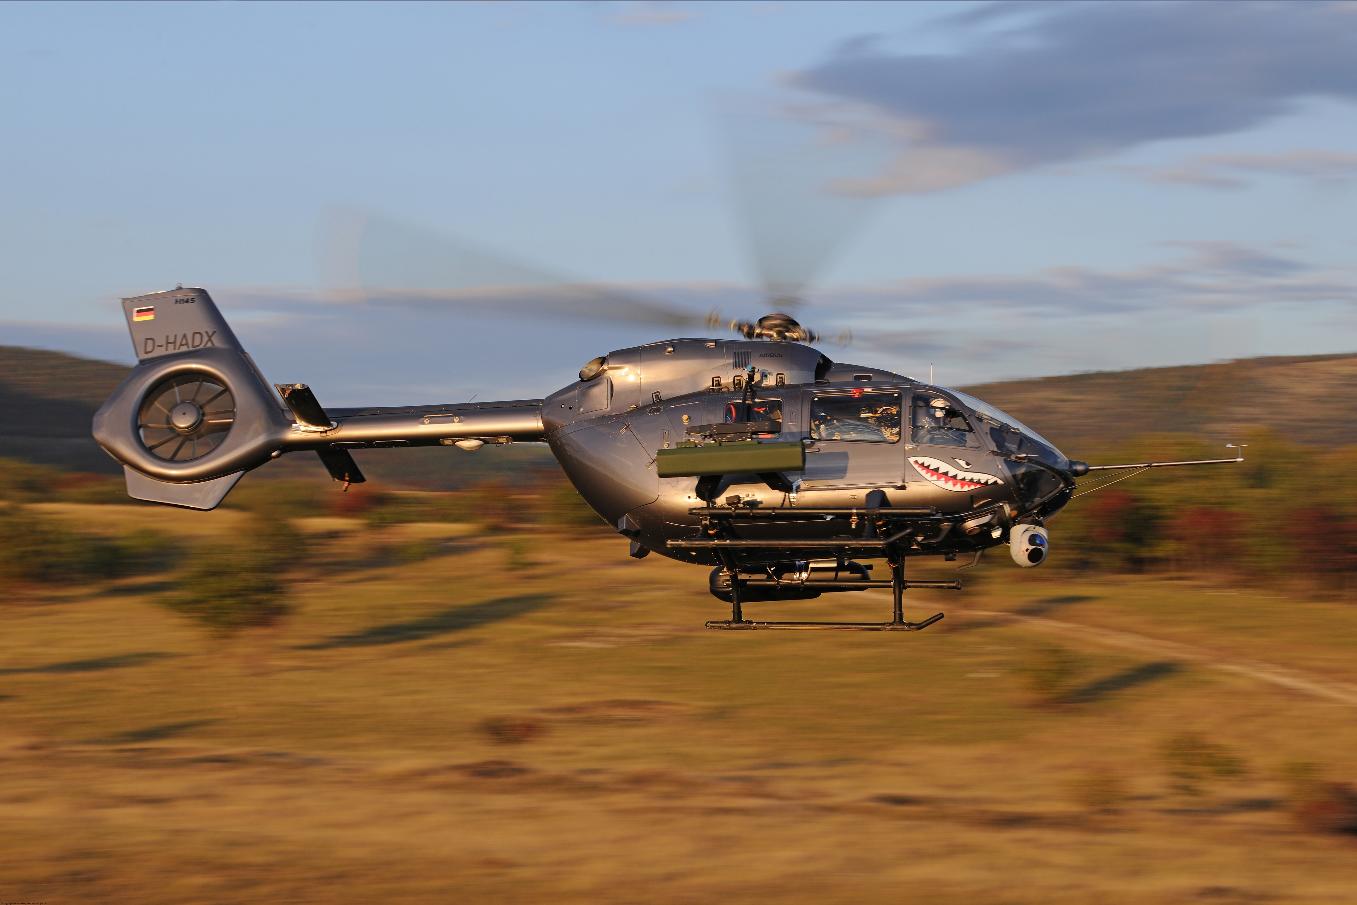 Airbus Helicopters tests weapons on H145M